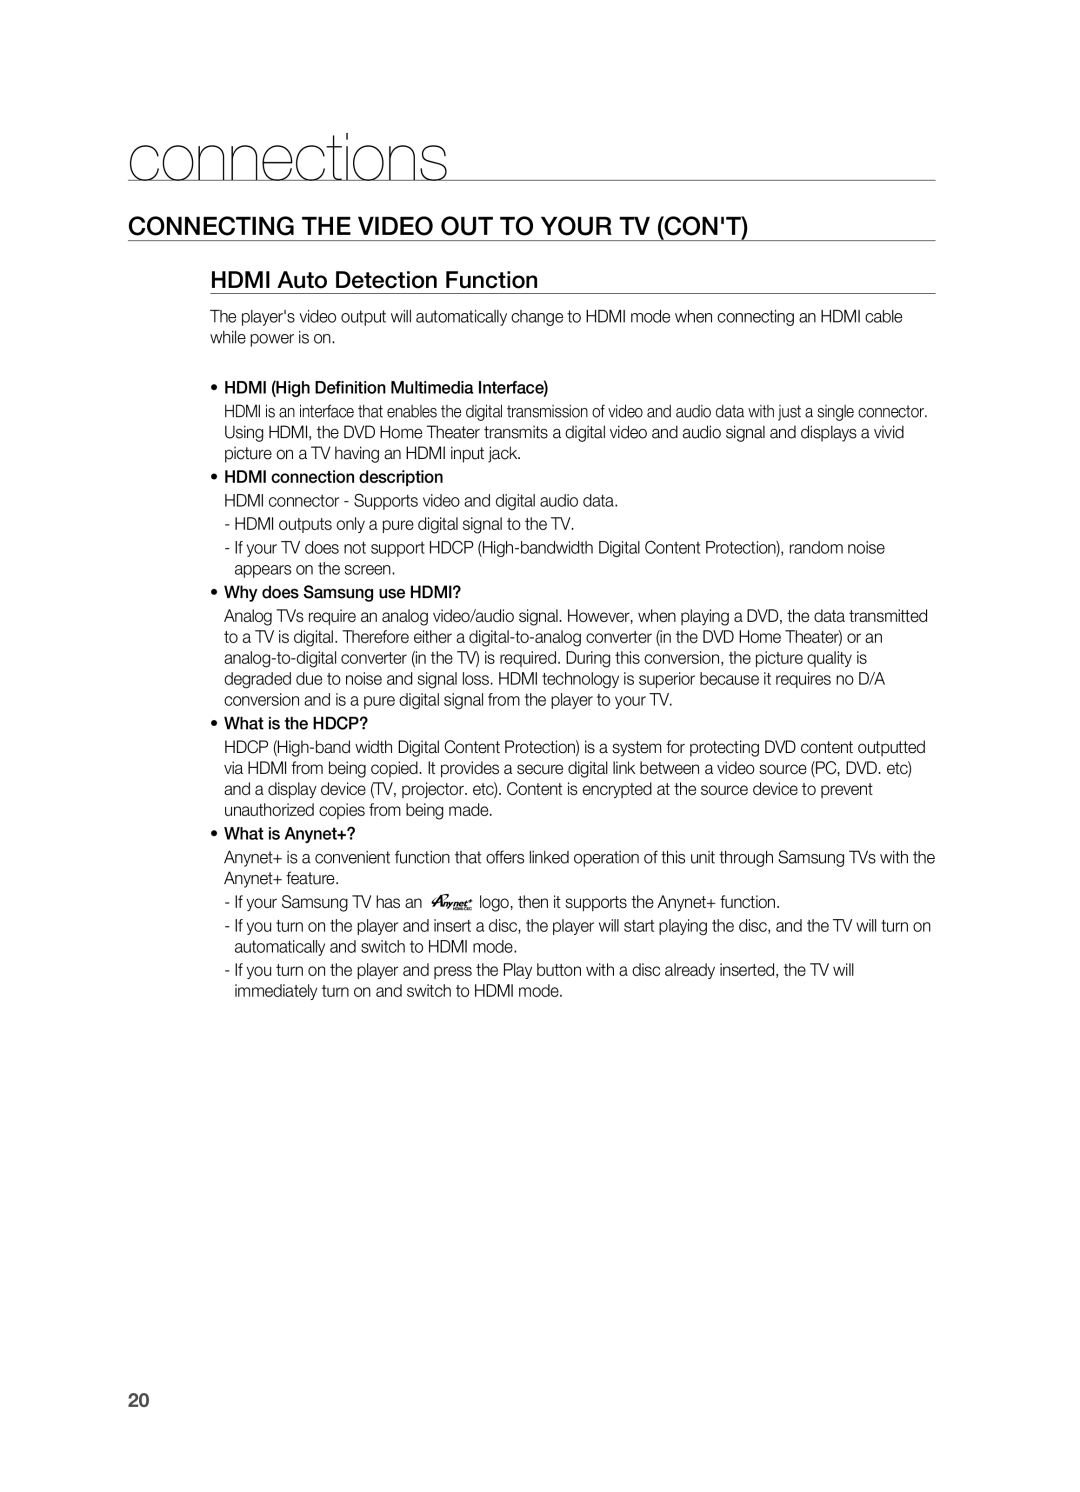 Sony HT-X810 user manual Connecting the Video Out to your TV cont, HDMI Auto Detection Function, connections 